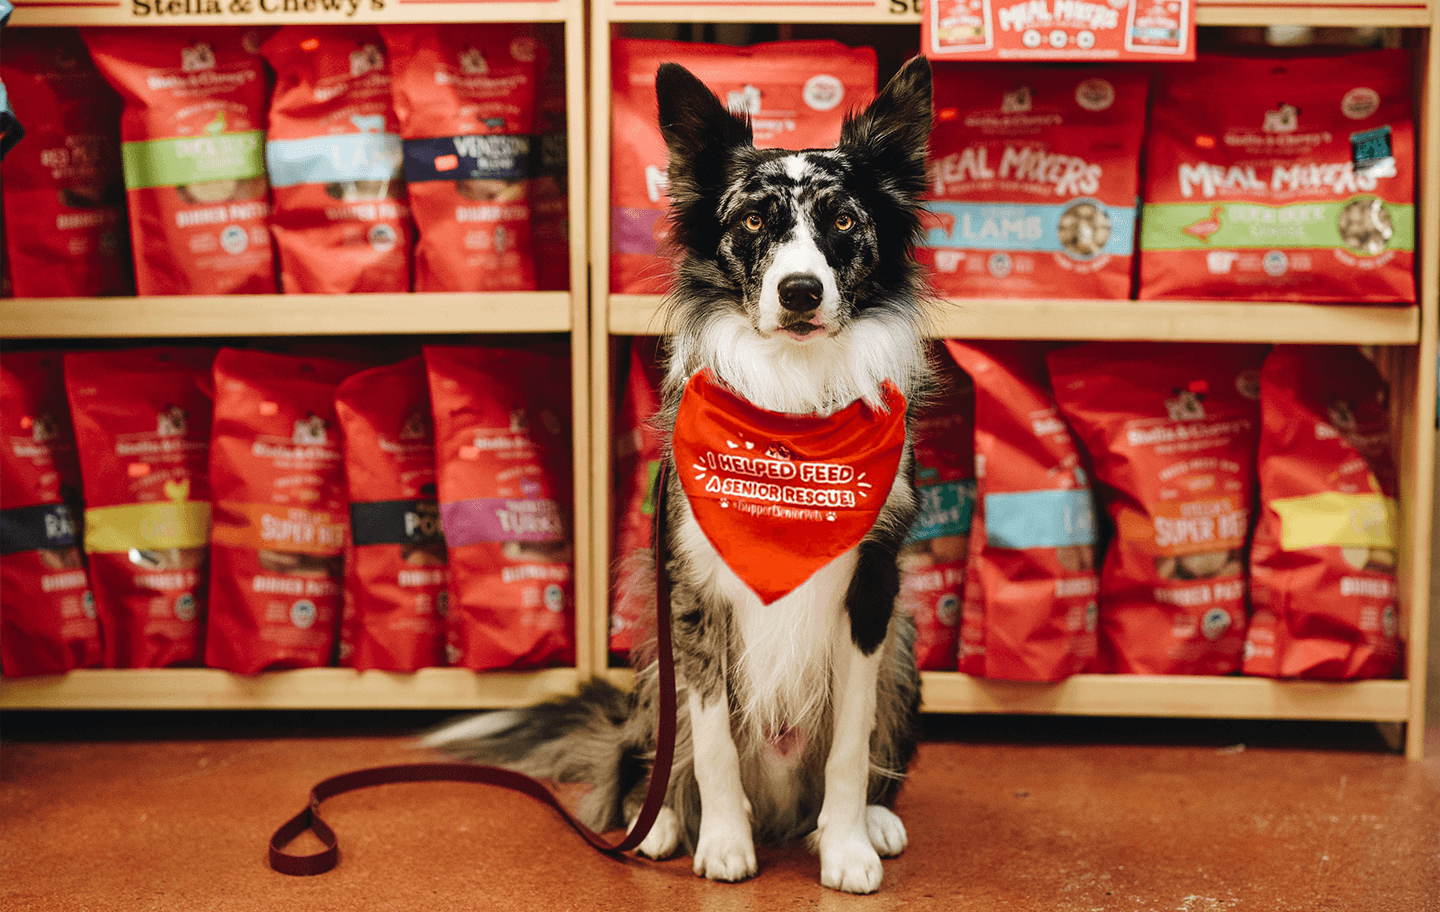 dog wearing red bandana in front of food display